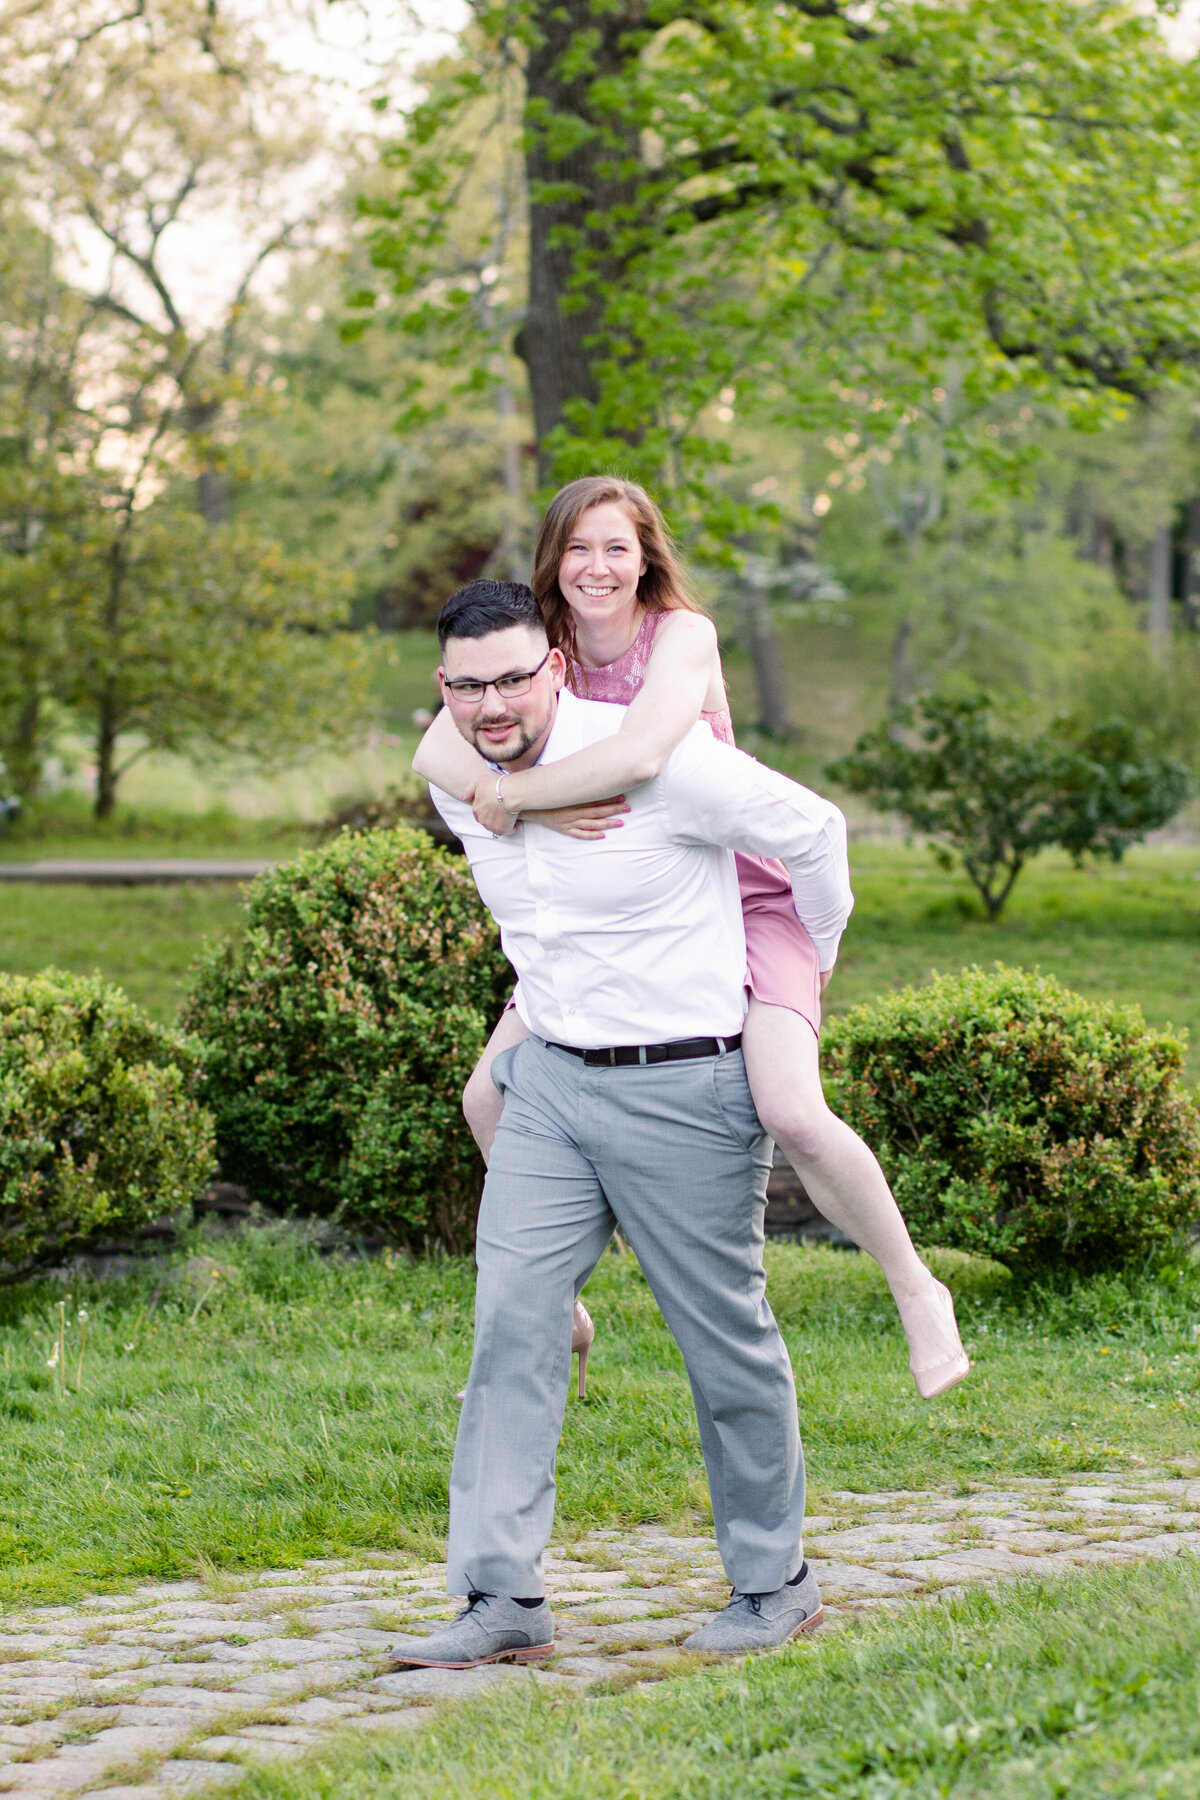 Danielle-Paul-Roger-Williams-Park-Engagement-Session-Kelly-Pomeroy-Photography-8338